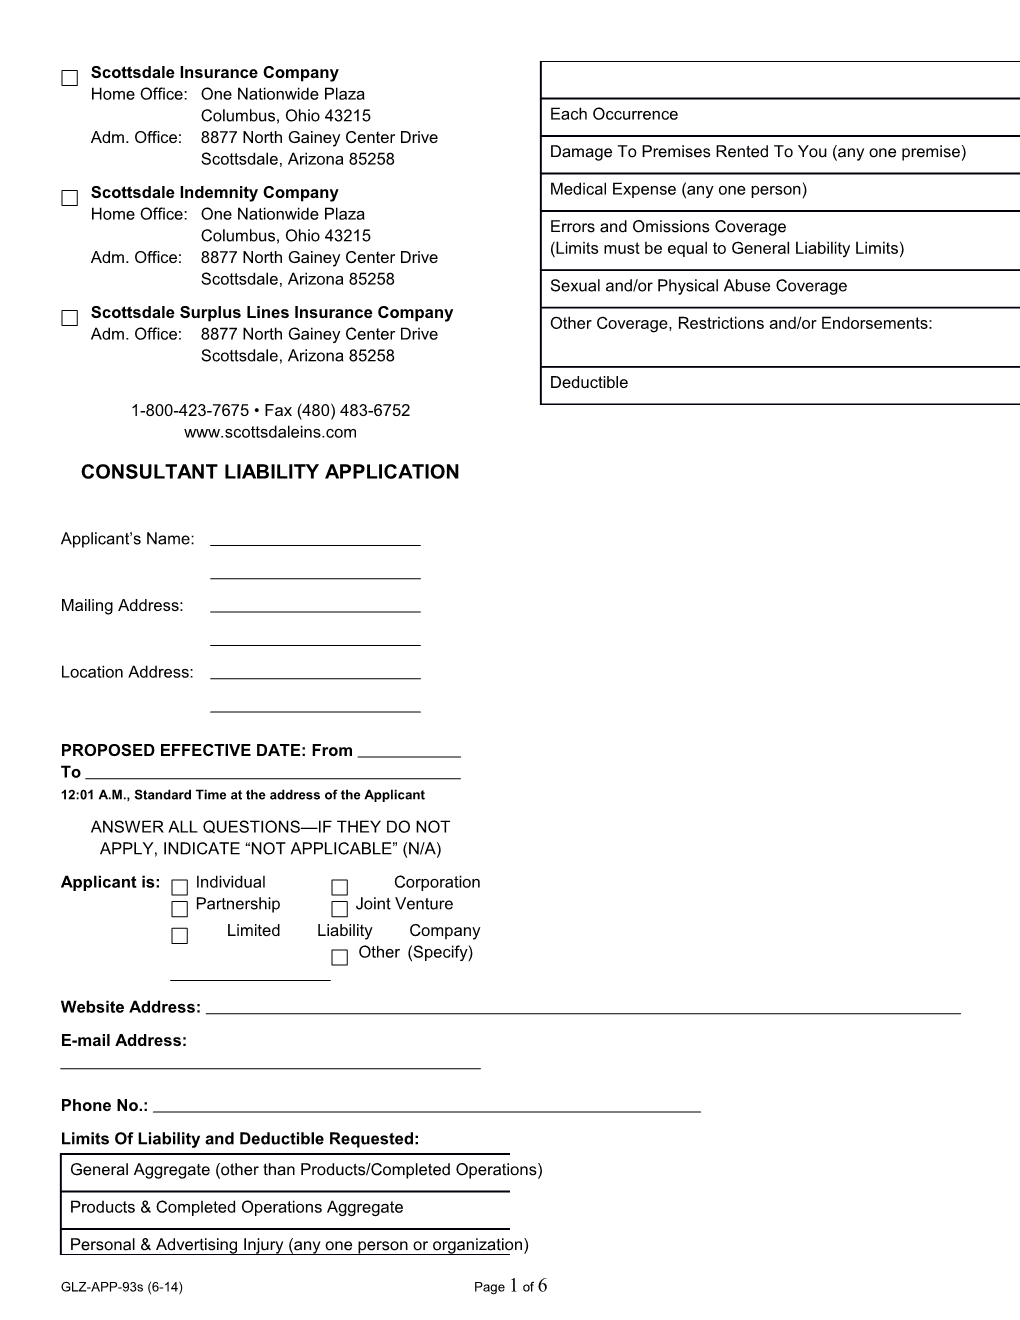 Consultant Liability Application